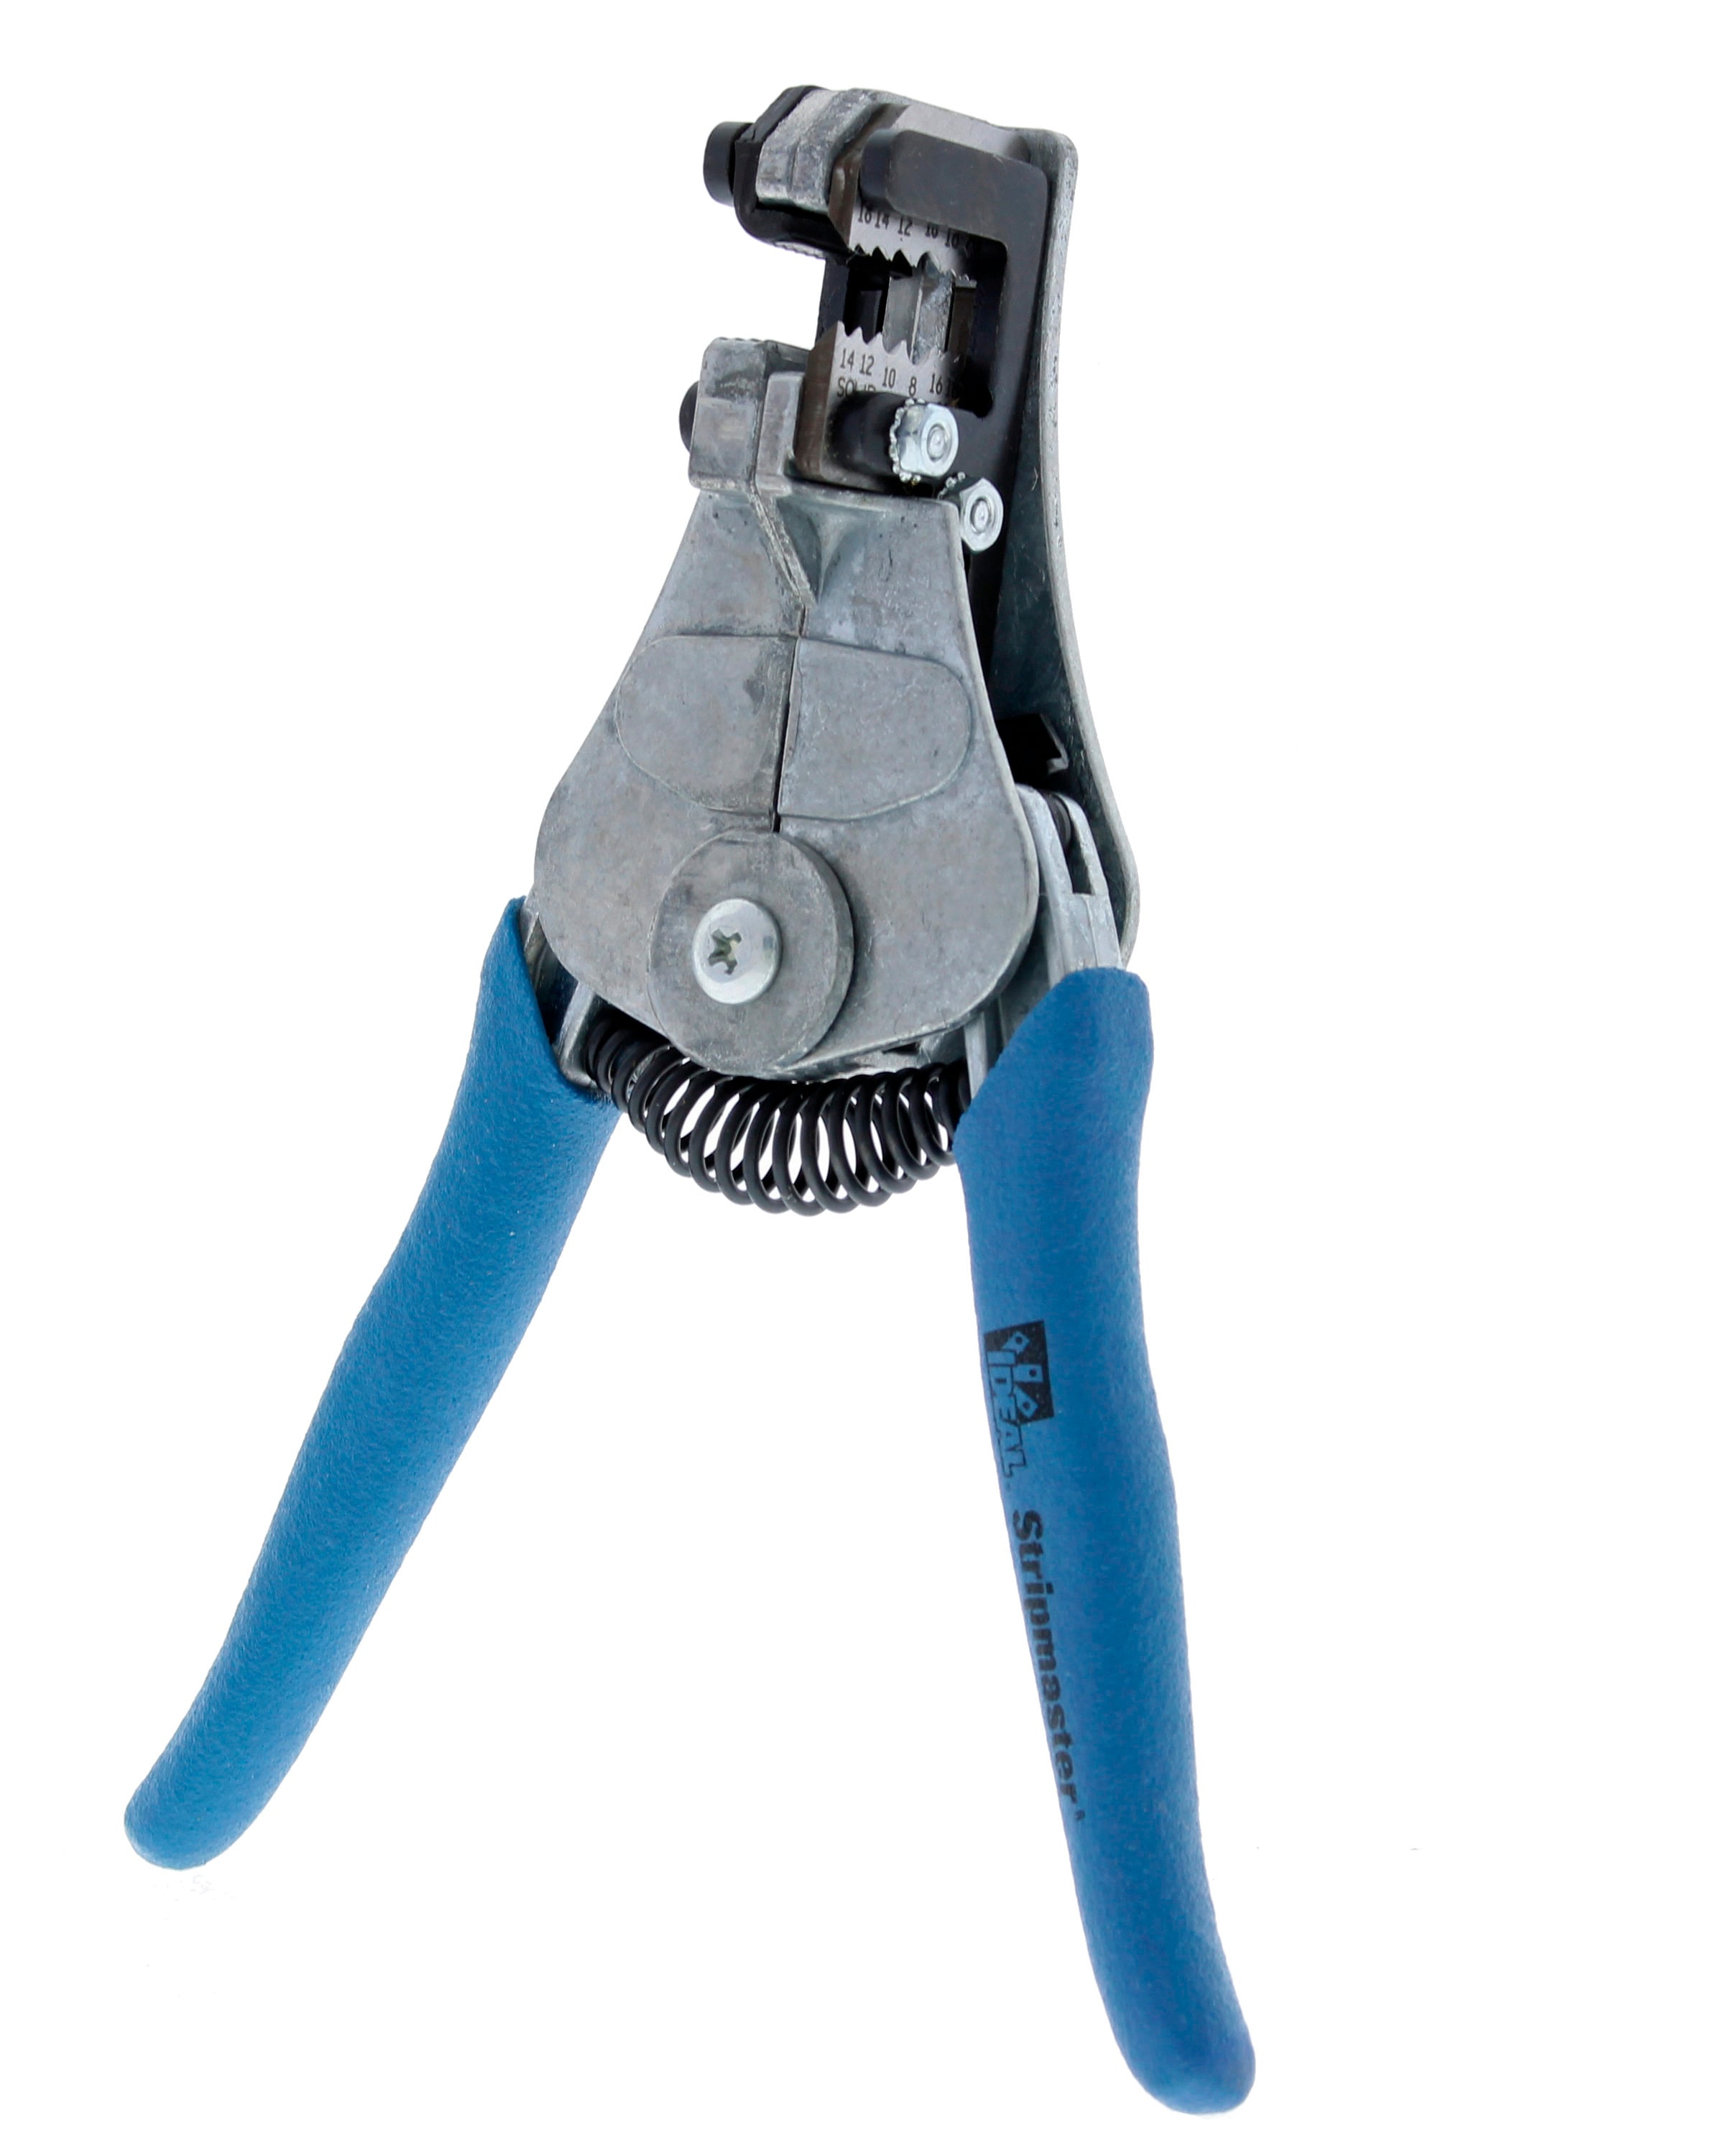 Ideal 45-484 Custom Stripmaster Wire Stripper Parallel Gripper 16-26 AWG Wire Fotronic Corporation